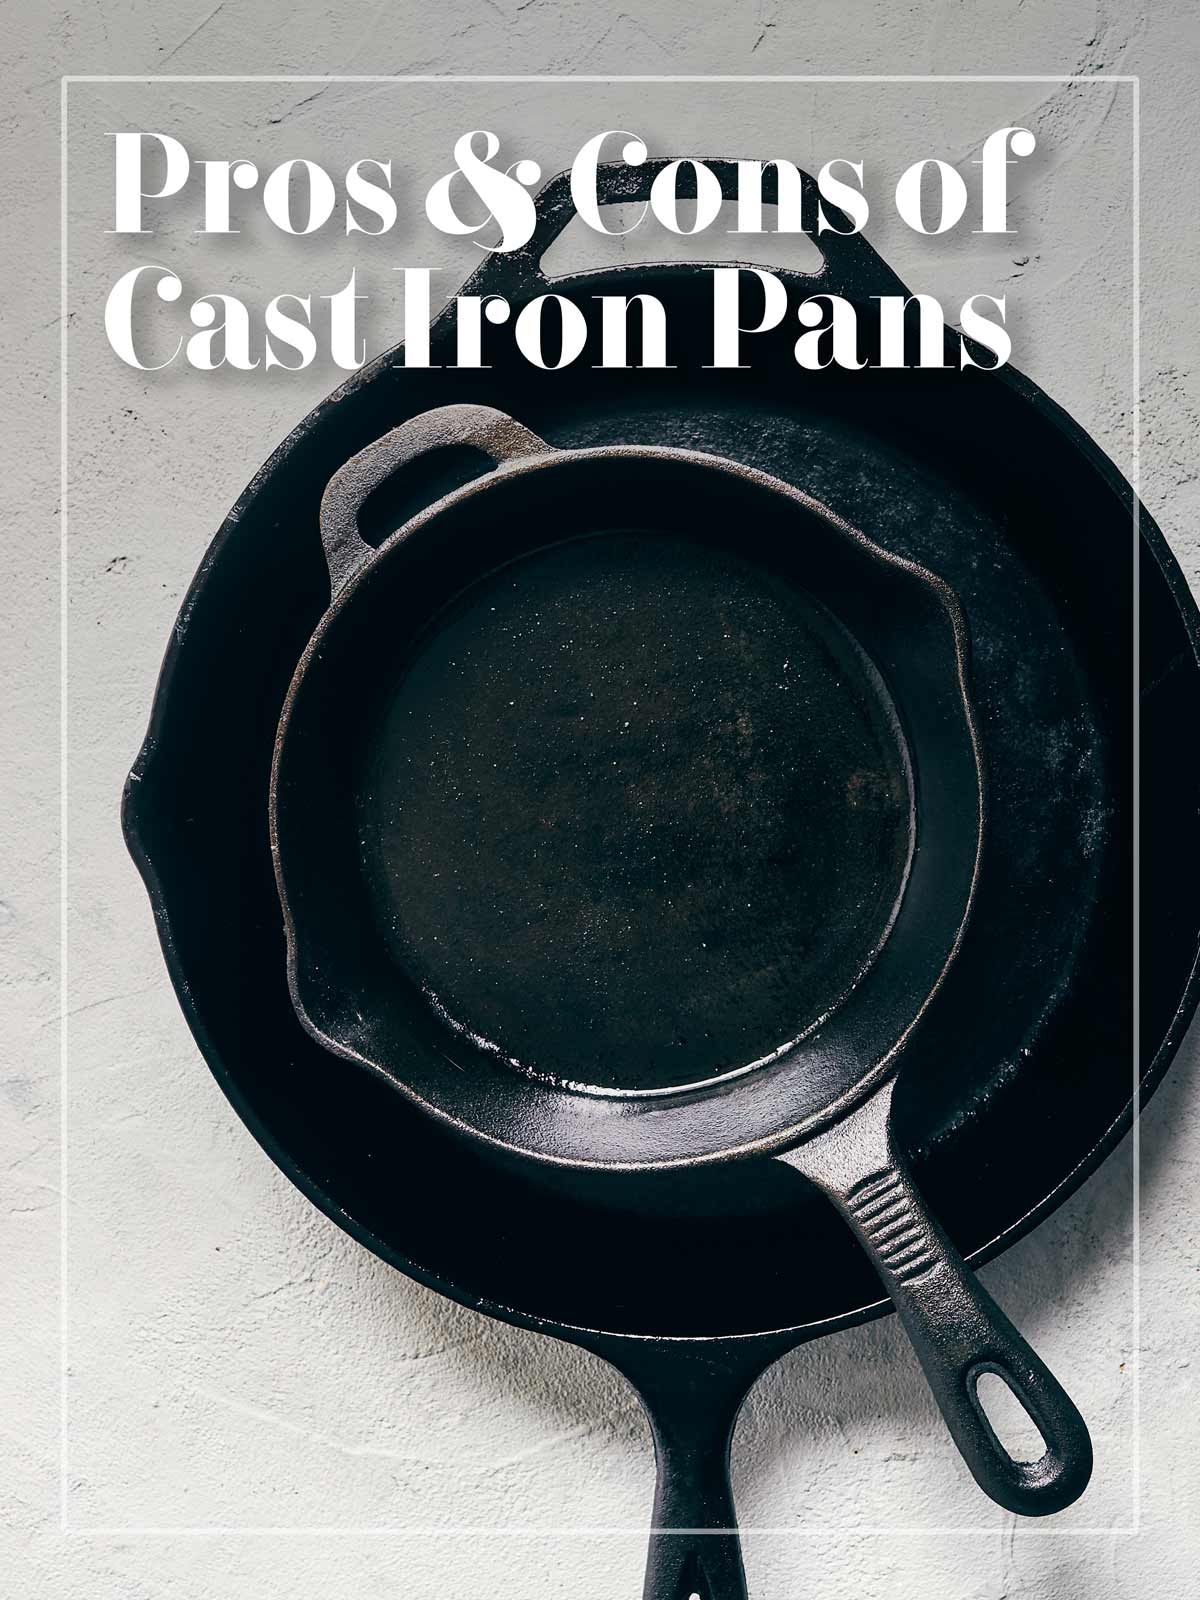 Having it all is easier than you think. Shop our cookware that's made